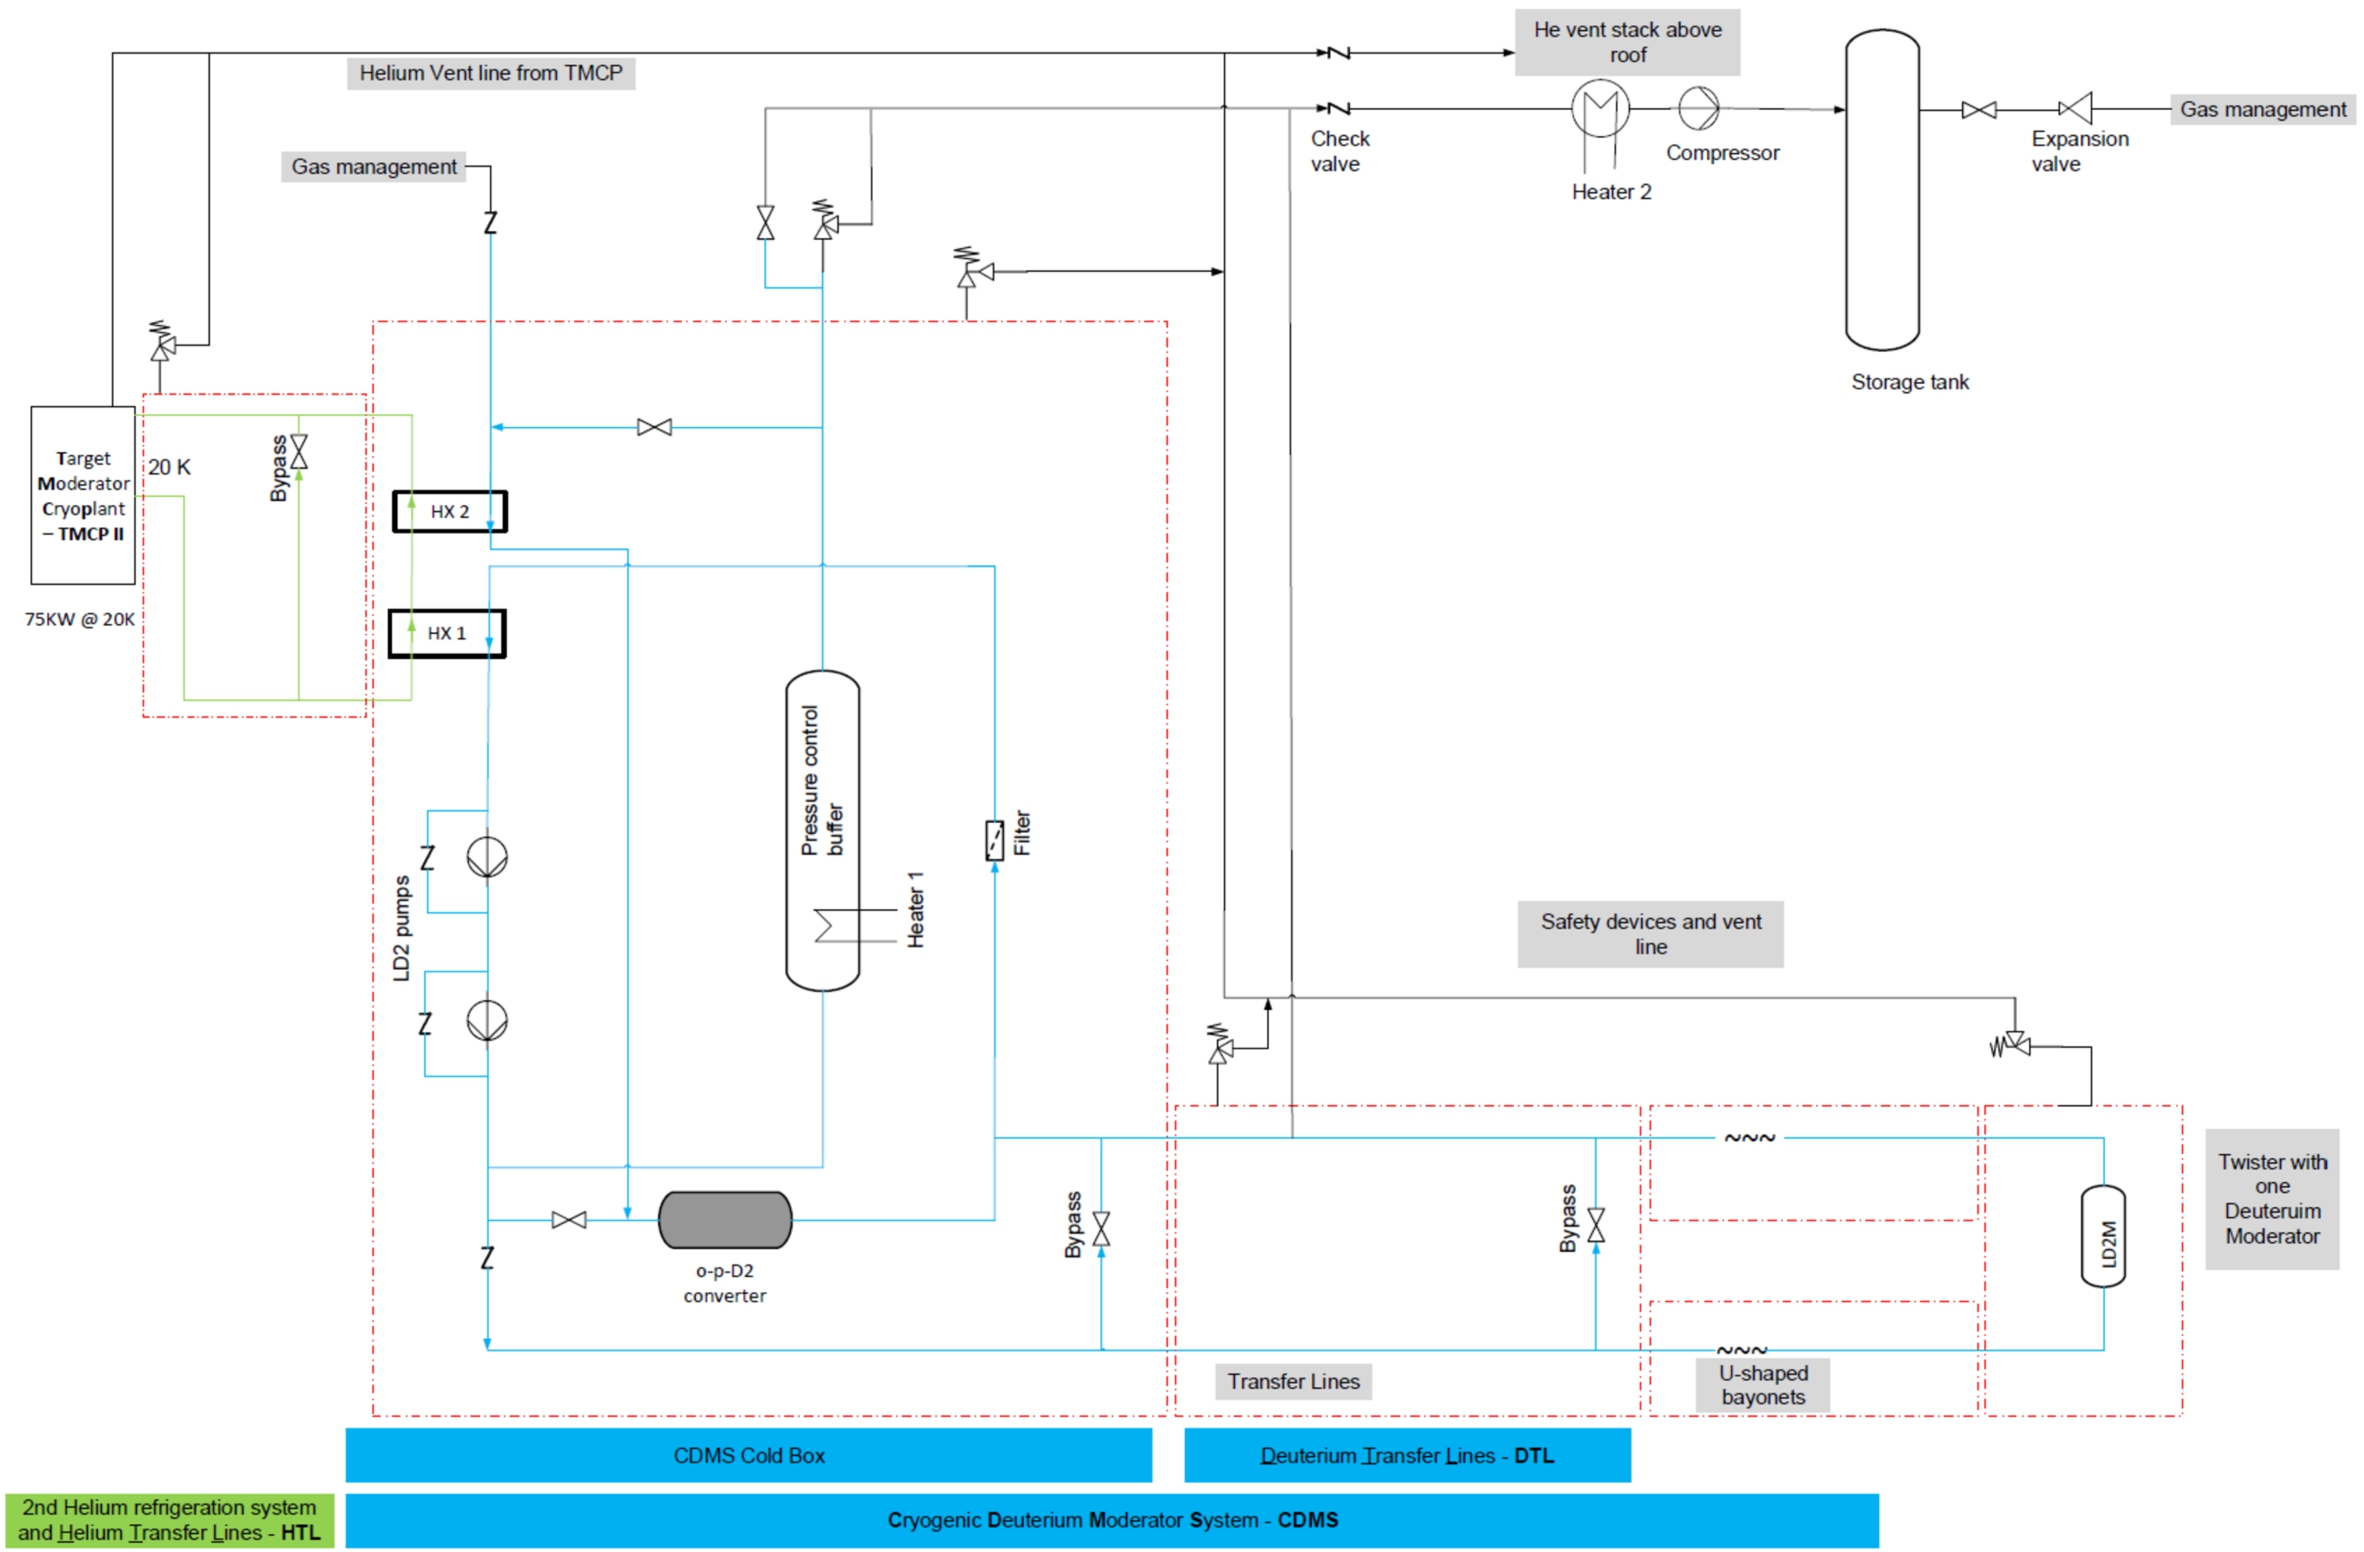 Piping and instrumentation diagram for the LD2 moderator system.